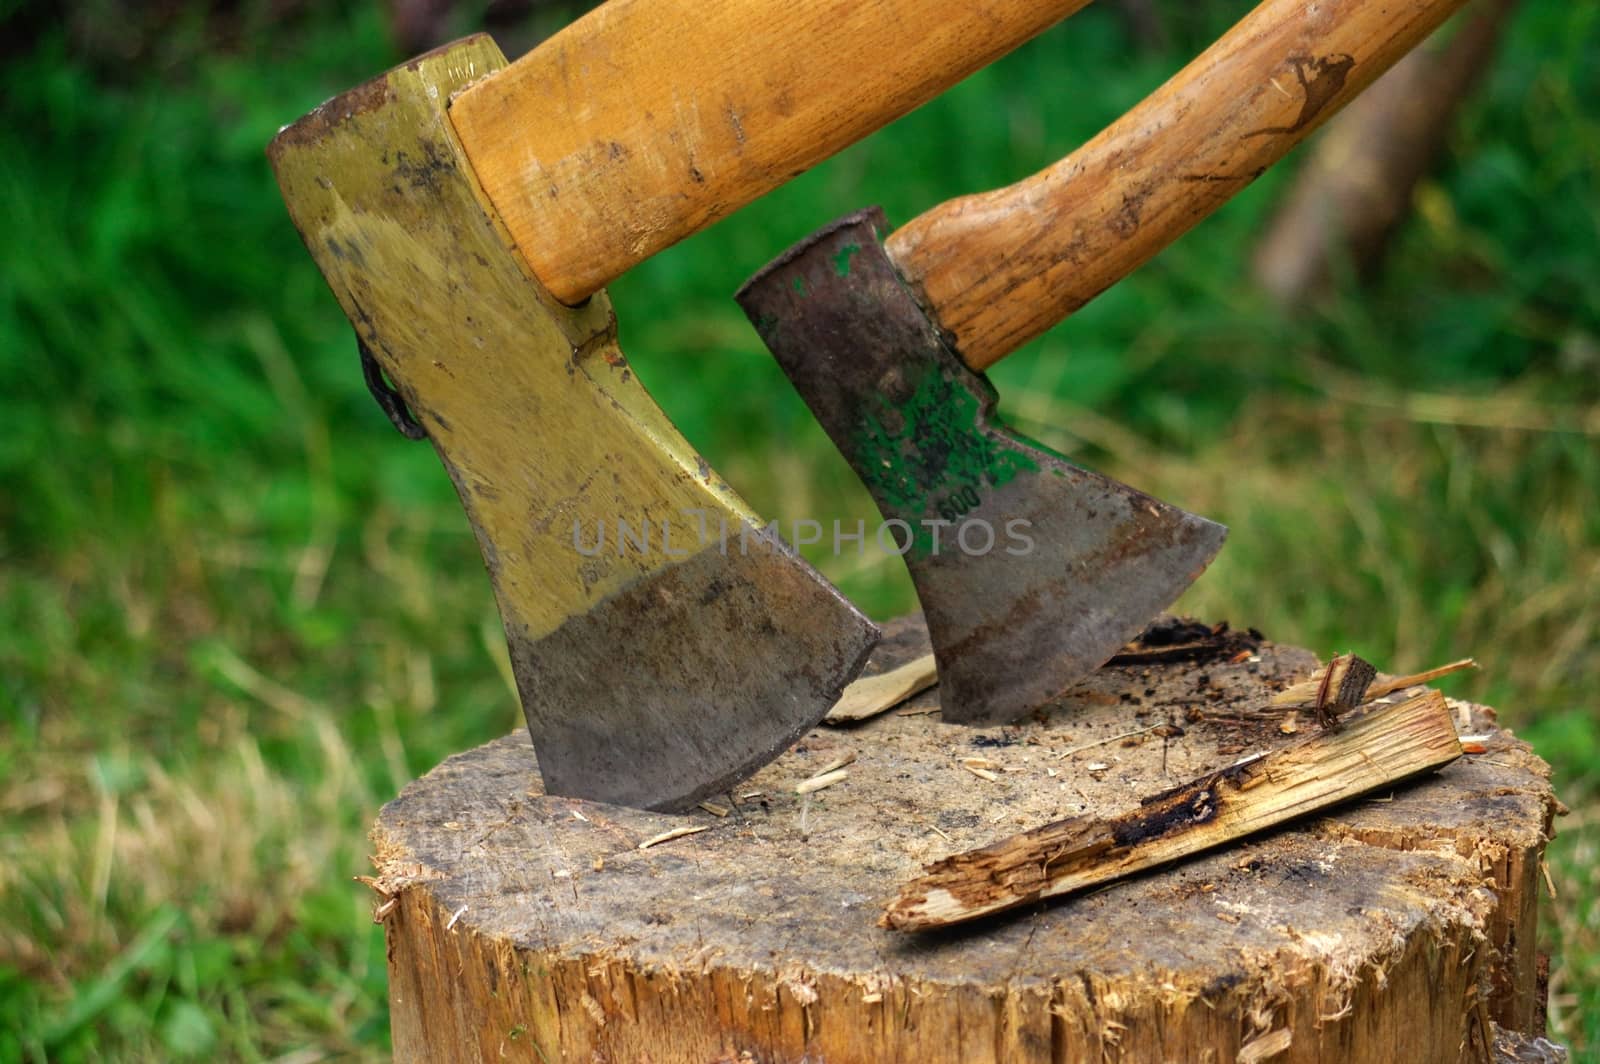 Ax in the deck on a background of green grass and firewood